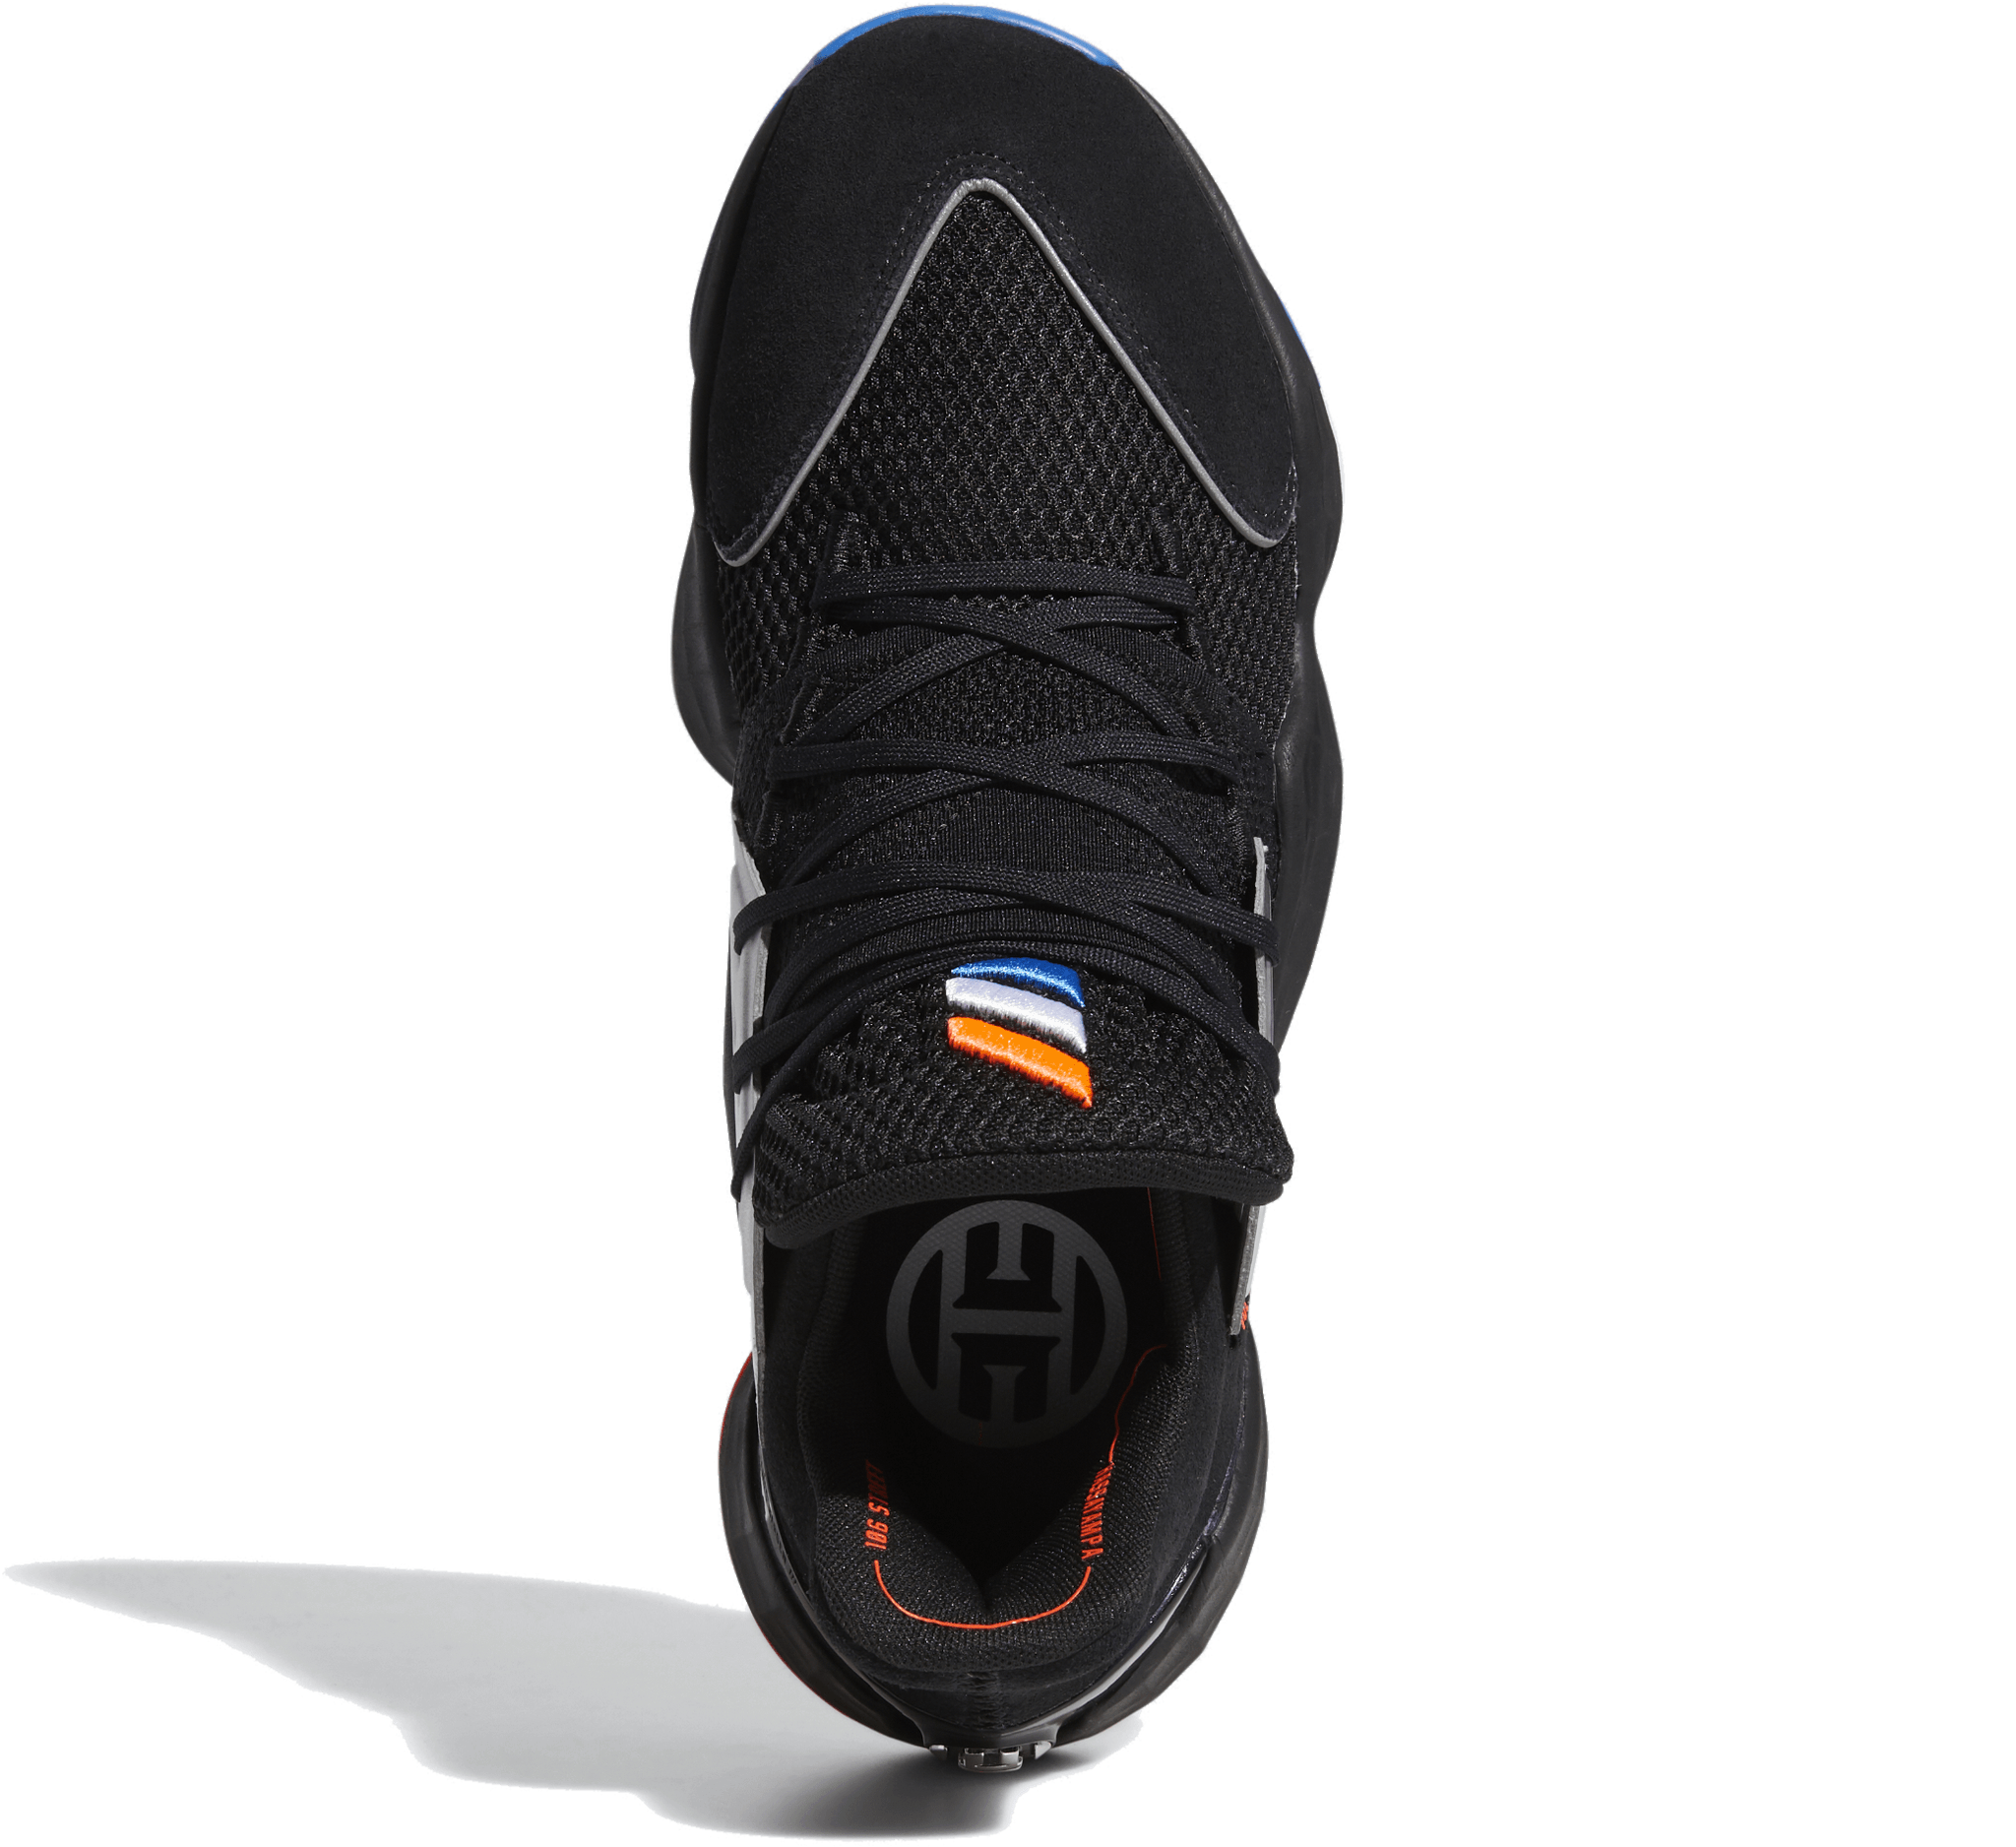 harden vol 4 performance review